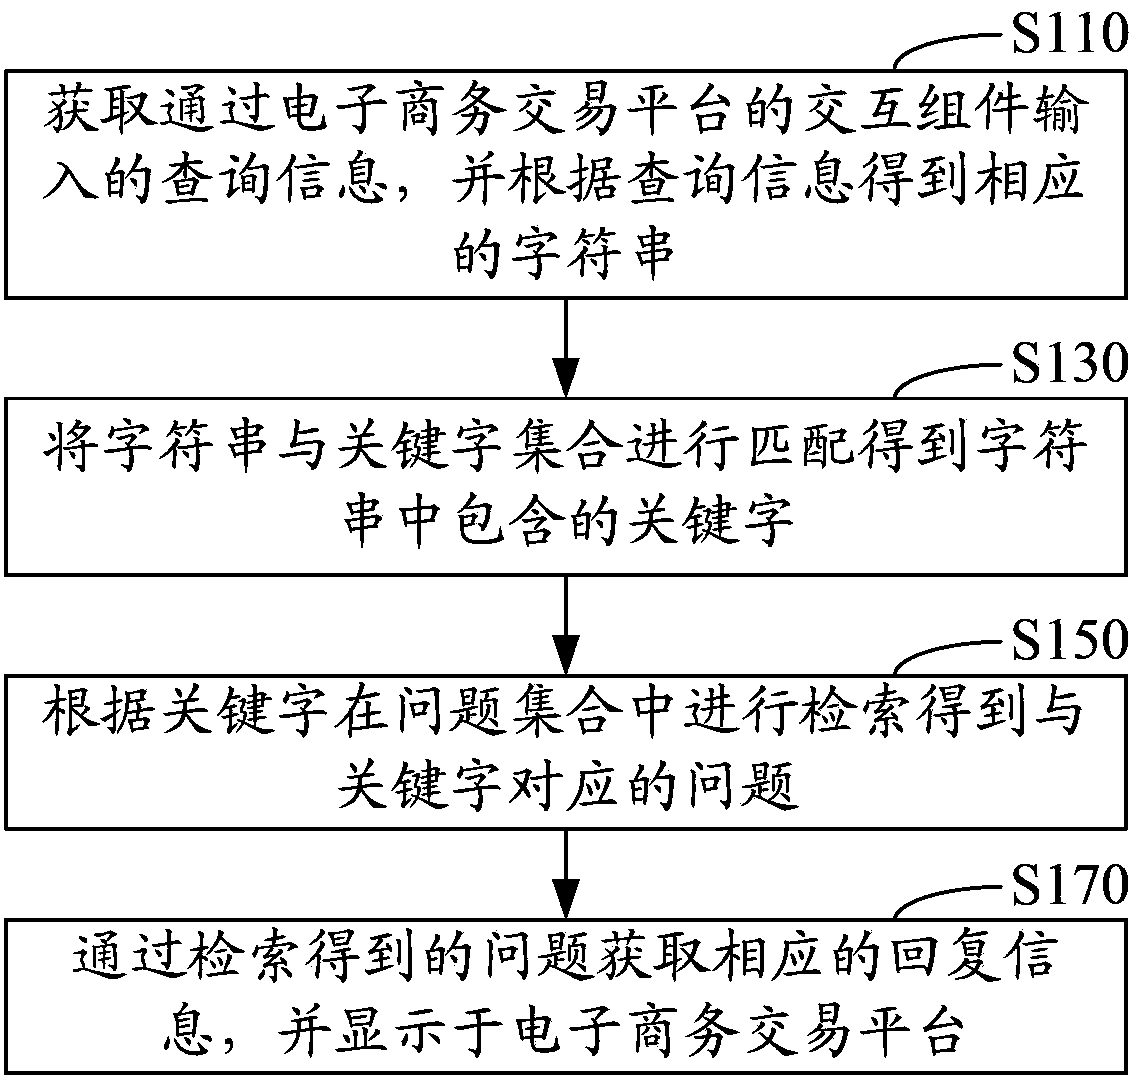 Question and answer interaction method and system of electronic commerce transaction platform